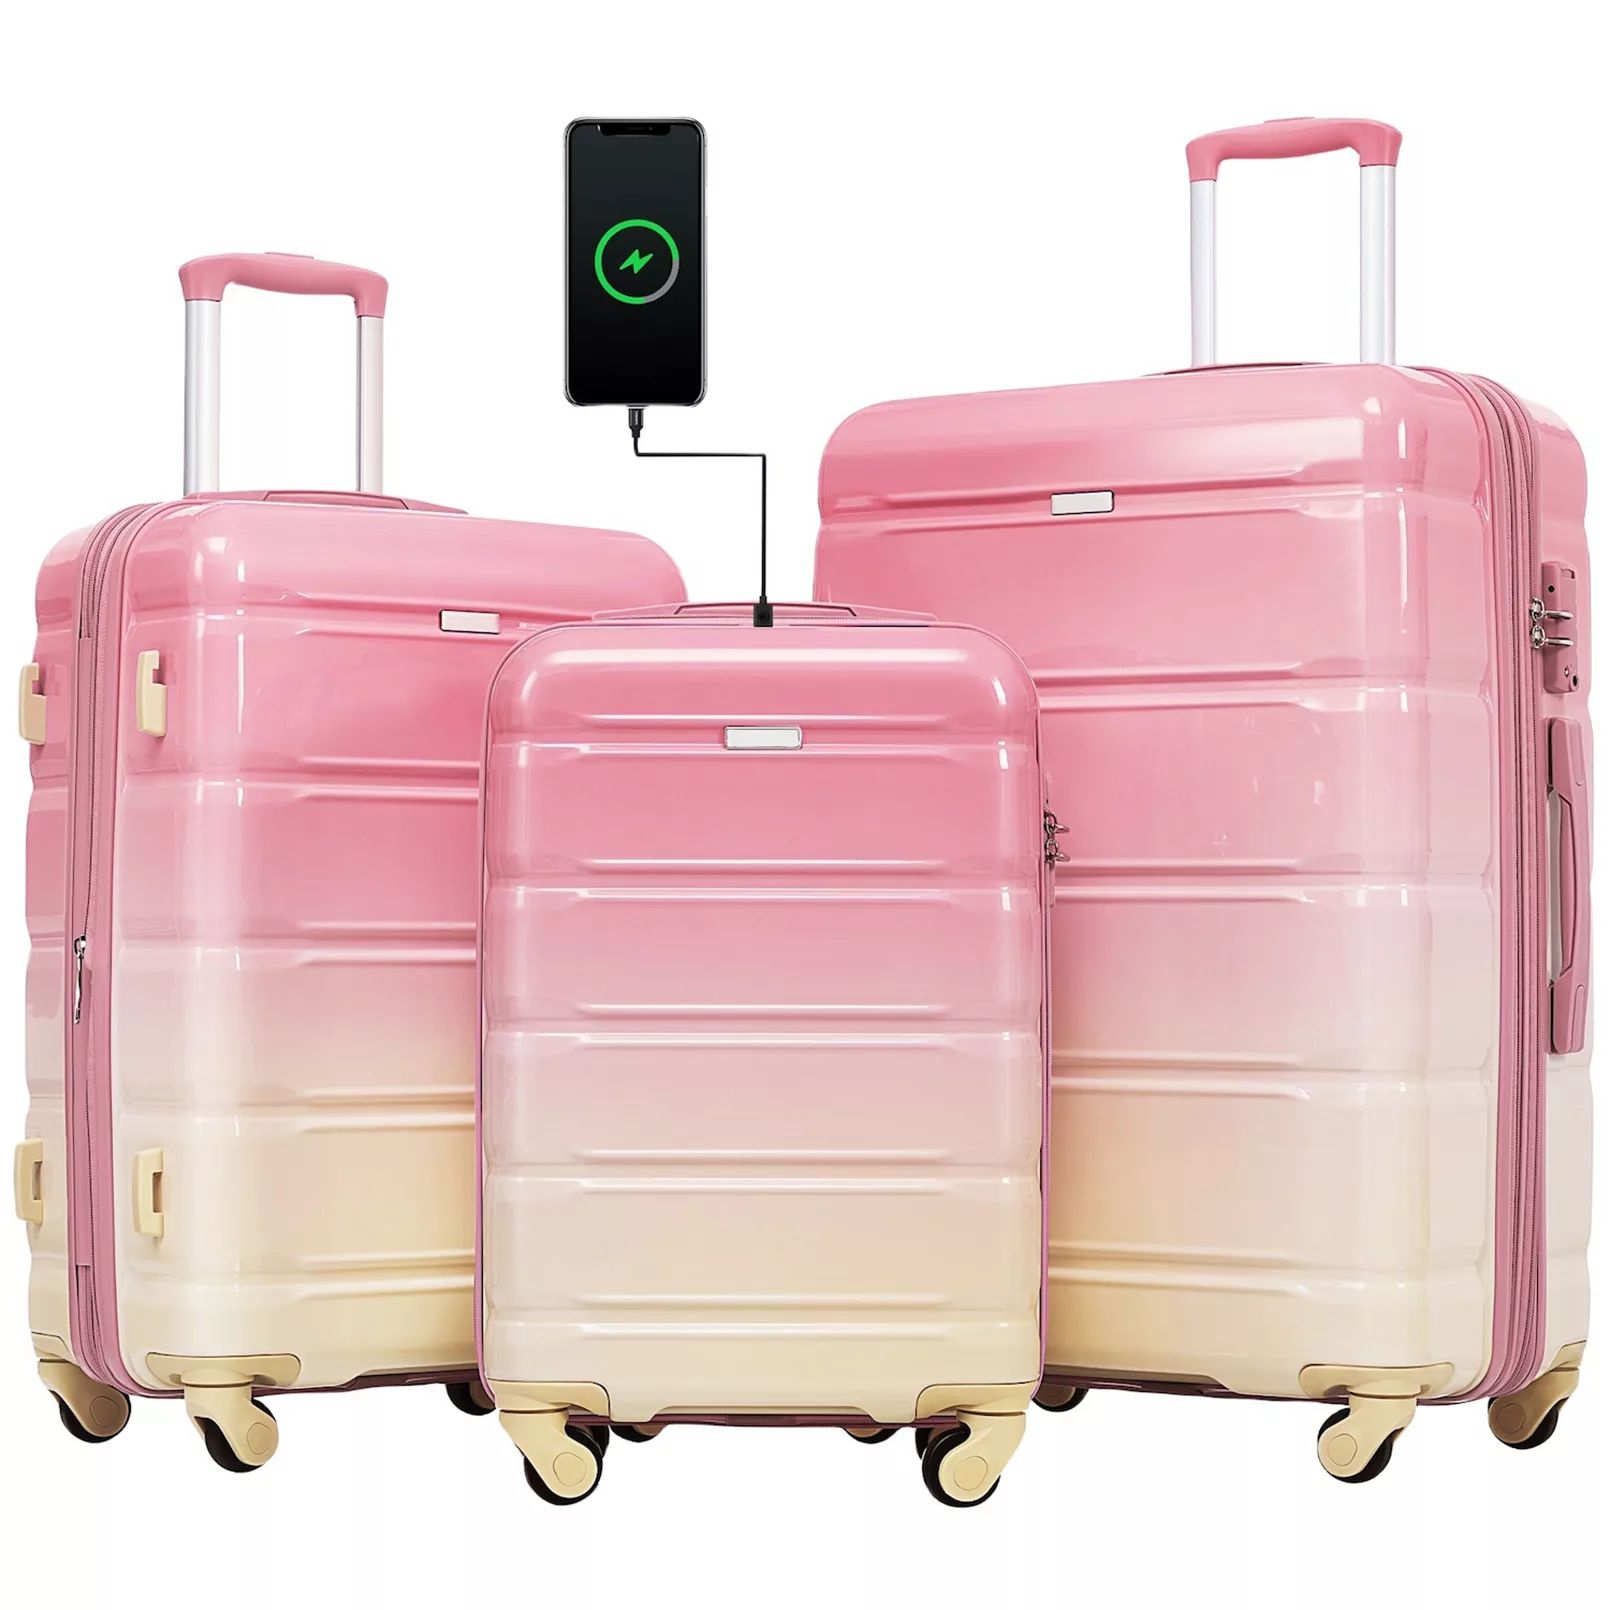 Luggage Set Of 3 Spinner Suitcase Set With Usb Port And Cup Holder | Kohl's